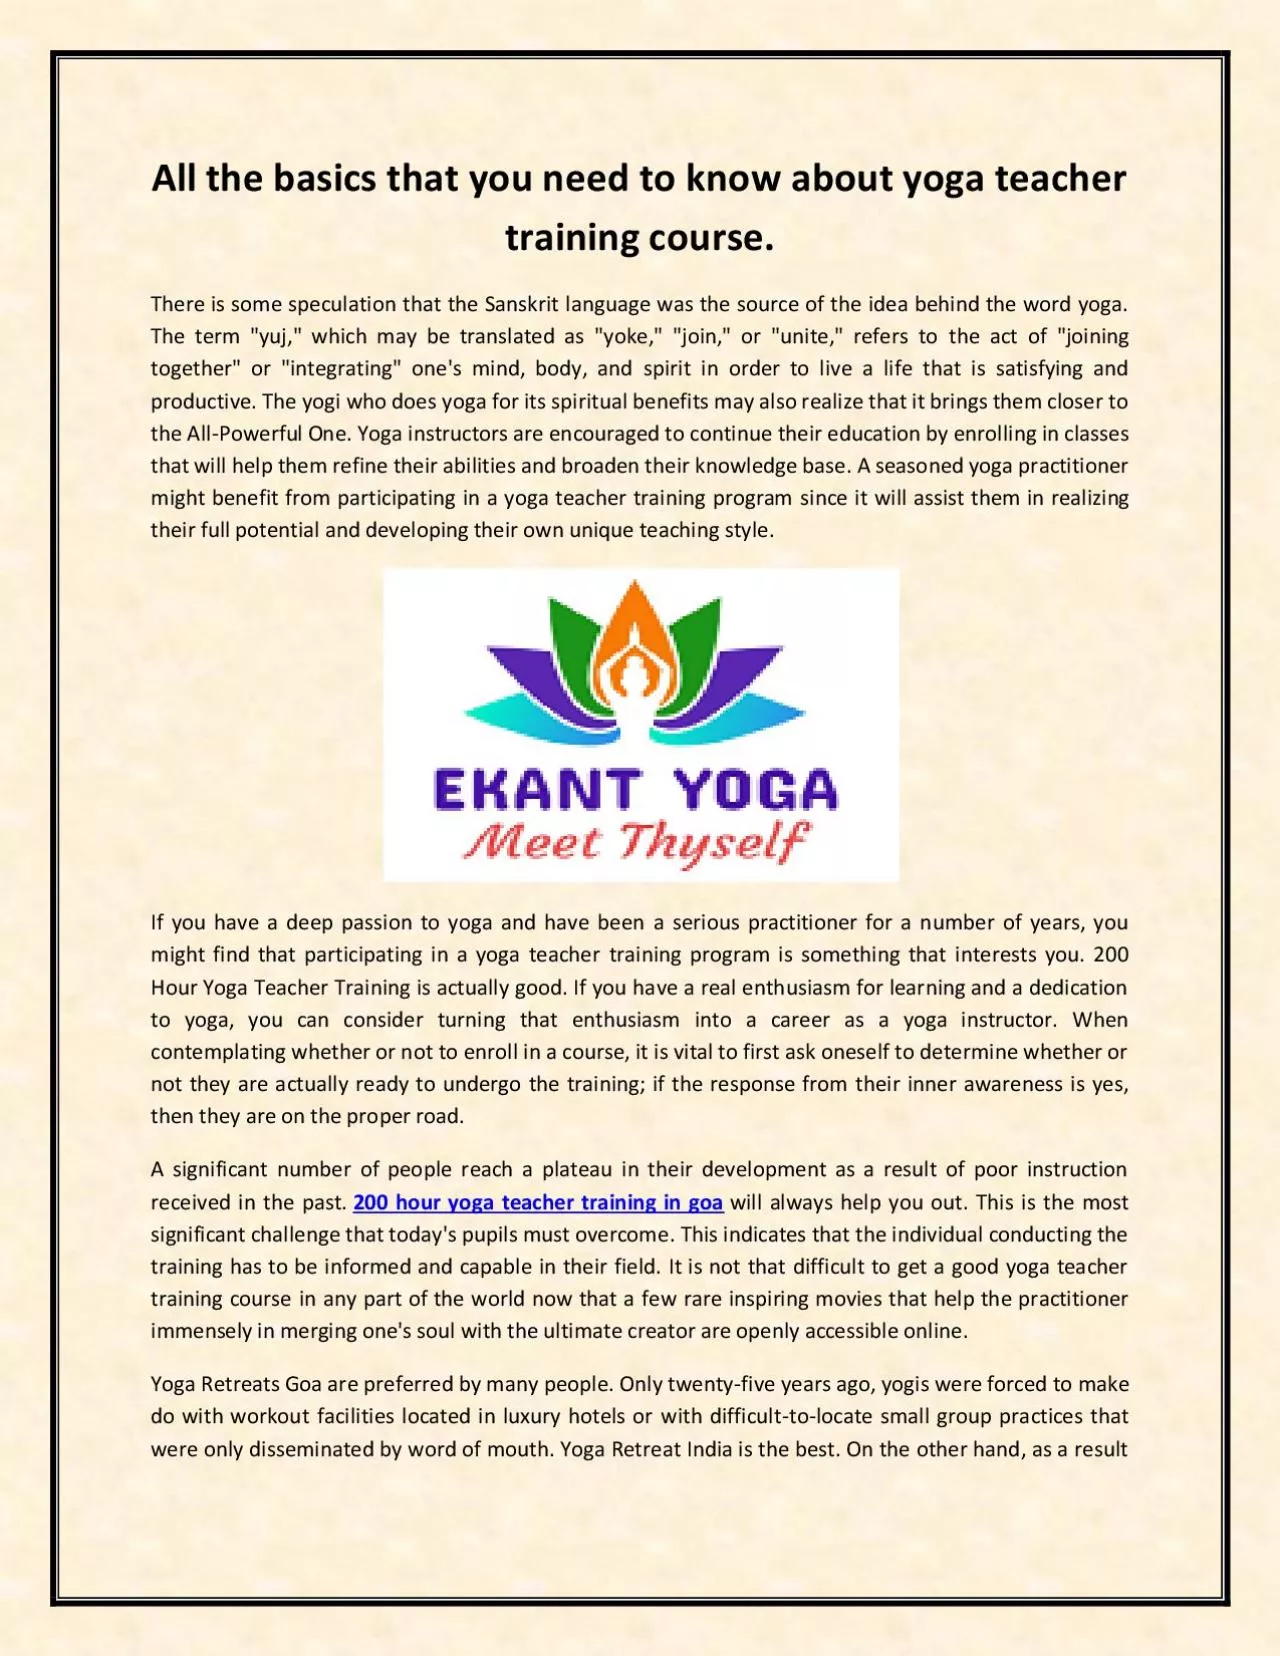 All the basics that you need to know about yoga teacher training course.